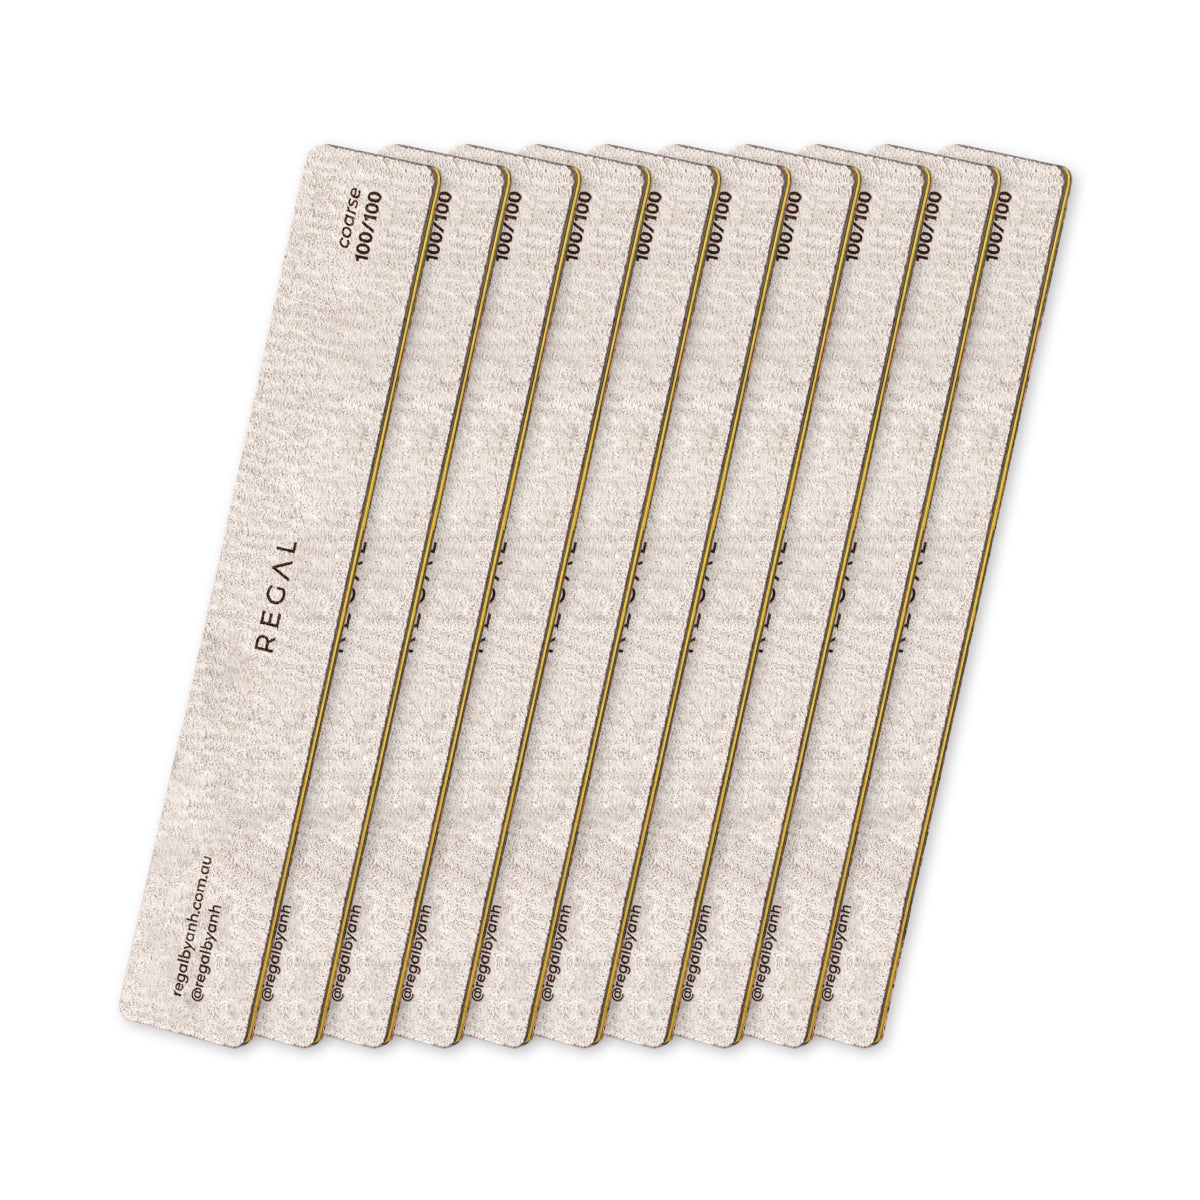 Regal by Anh Rectangle Coarse 100/100 Nail File (10 Pack)